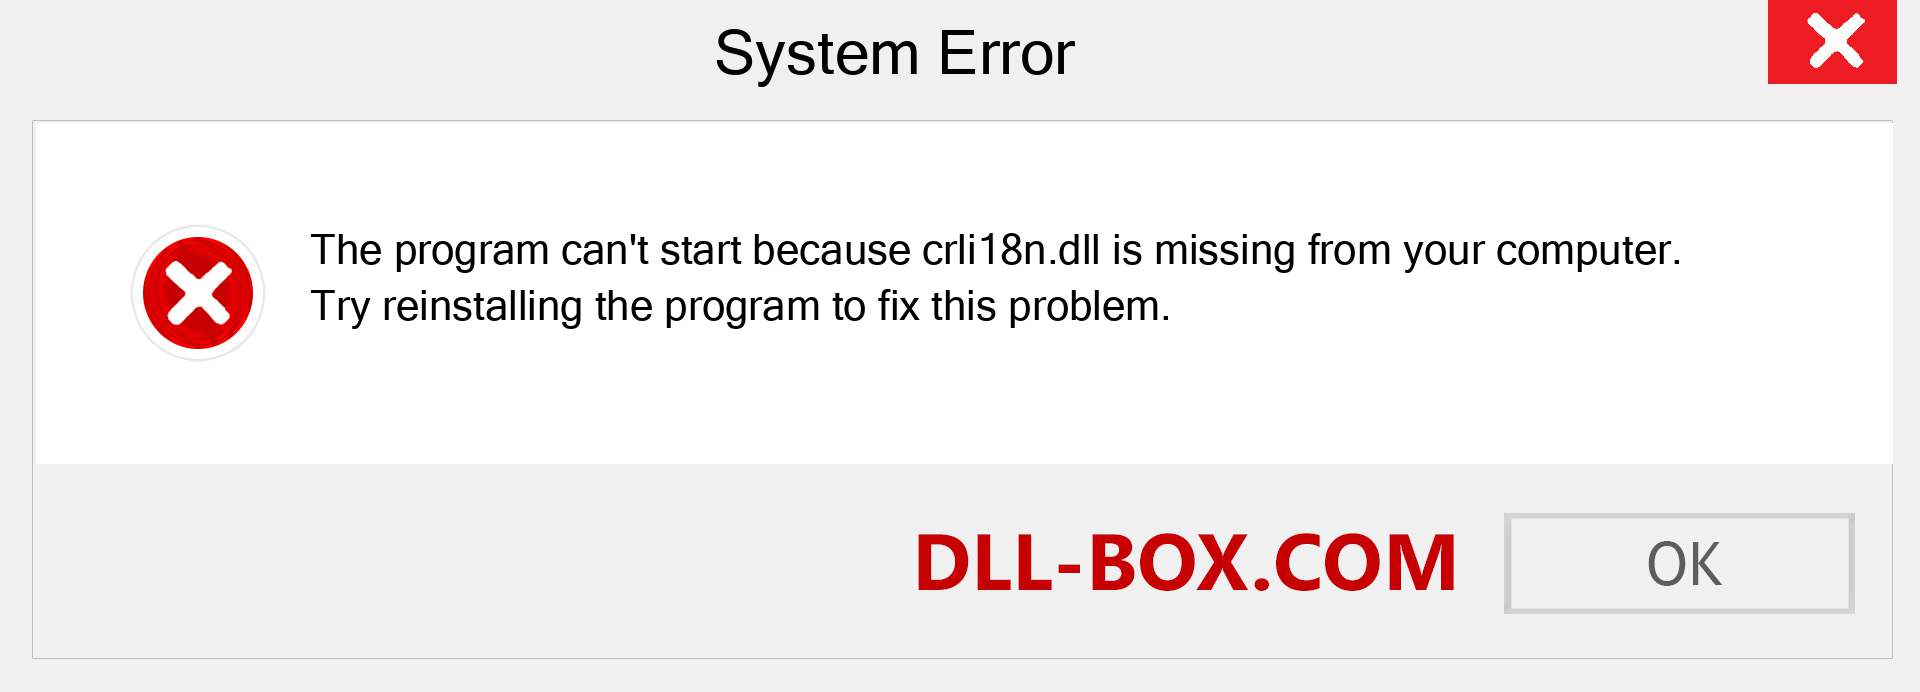  crli18n.dll file is missing?. Download for Windows 7, 8, 10 - Fix  crli18n dll Missing Error on Windows, photos, images